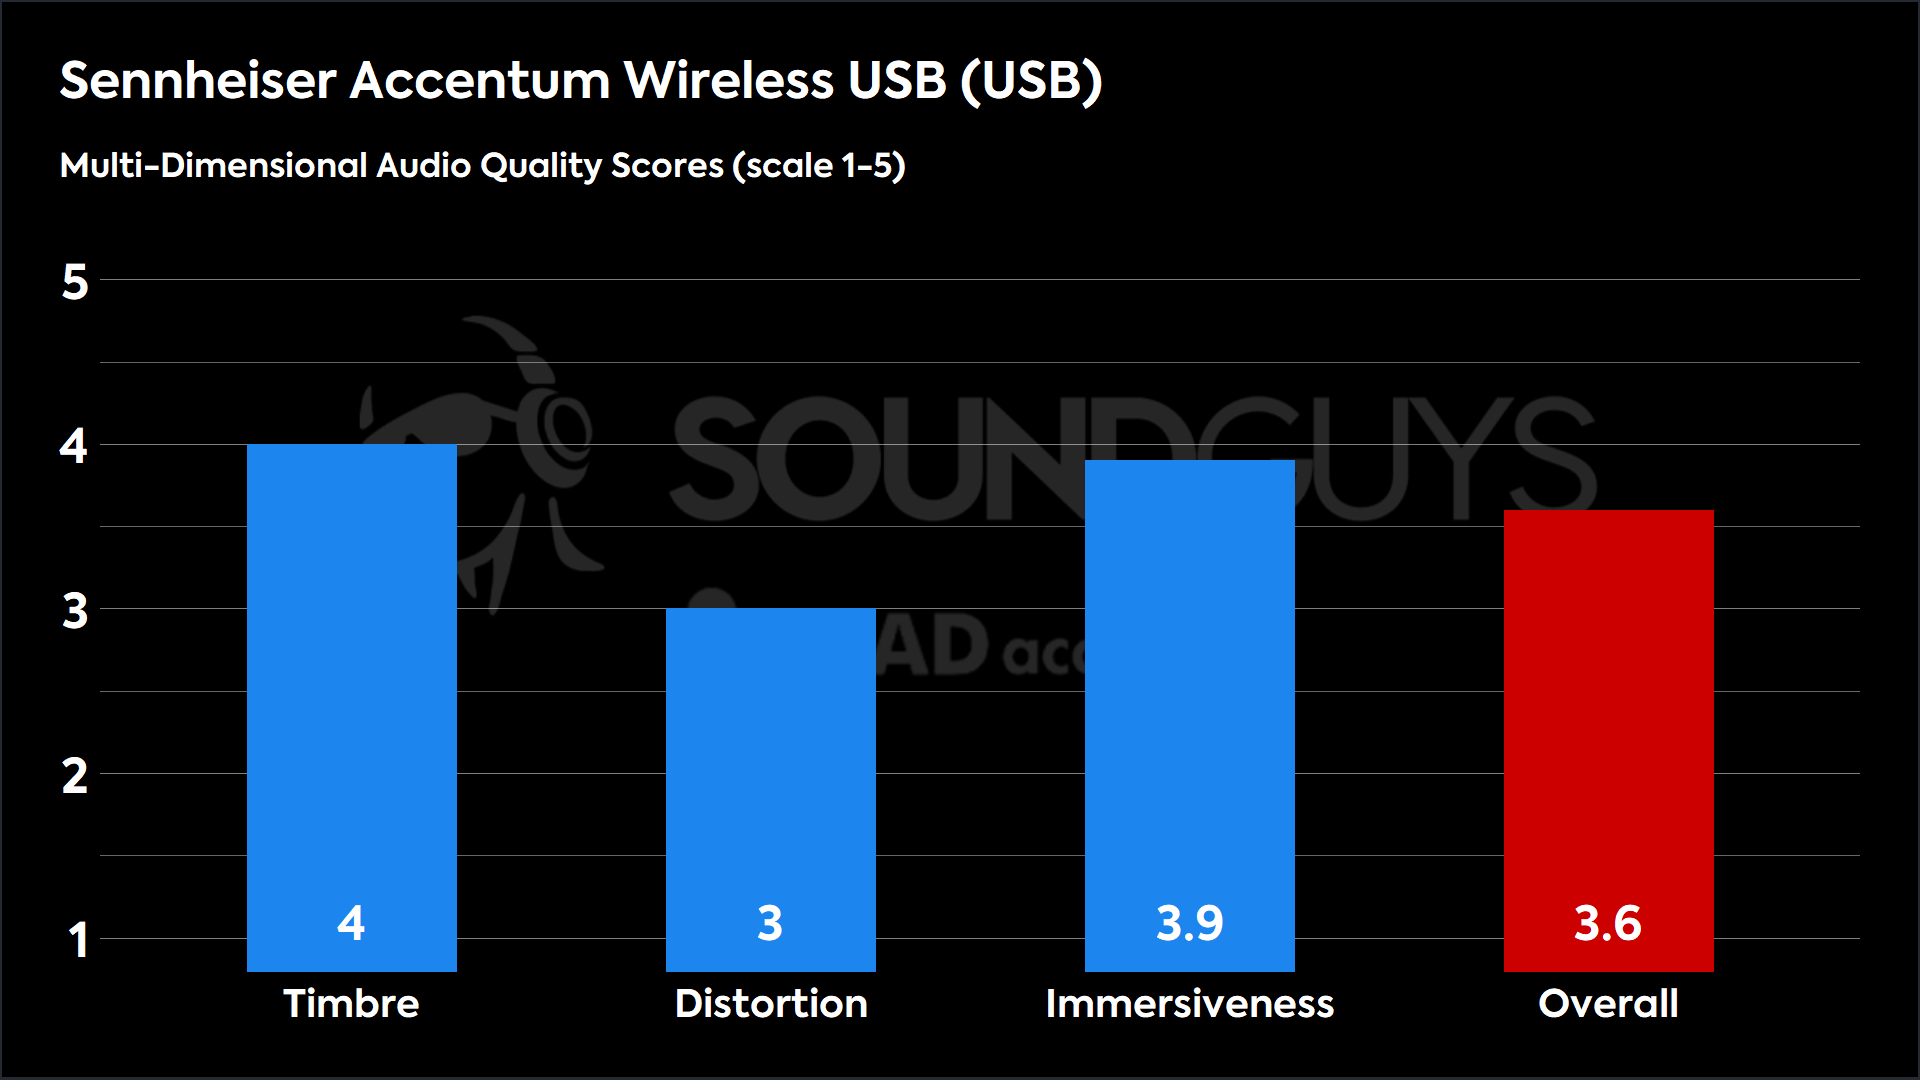 This chart shows the MDAQS results for the Sennheiser Accentum Wireless USB in USB mode. The Timbre score is 4, The Distortion score is 3, the Immersiveness score is 3.9, and the Overall Score is 3.6).